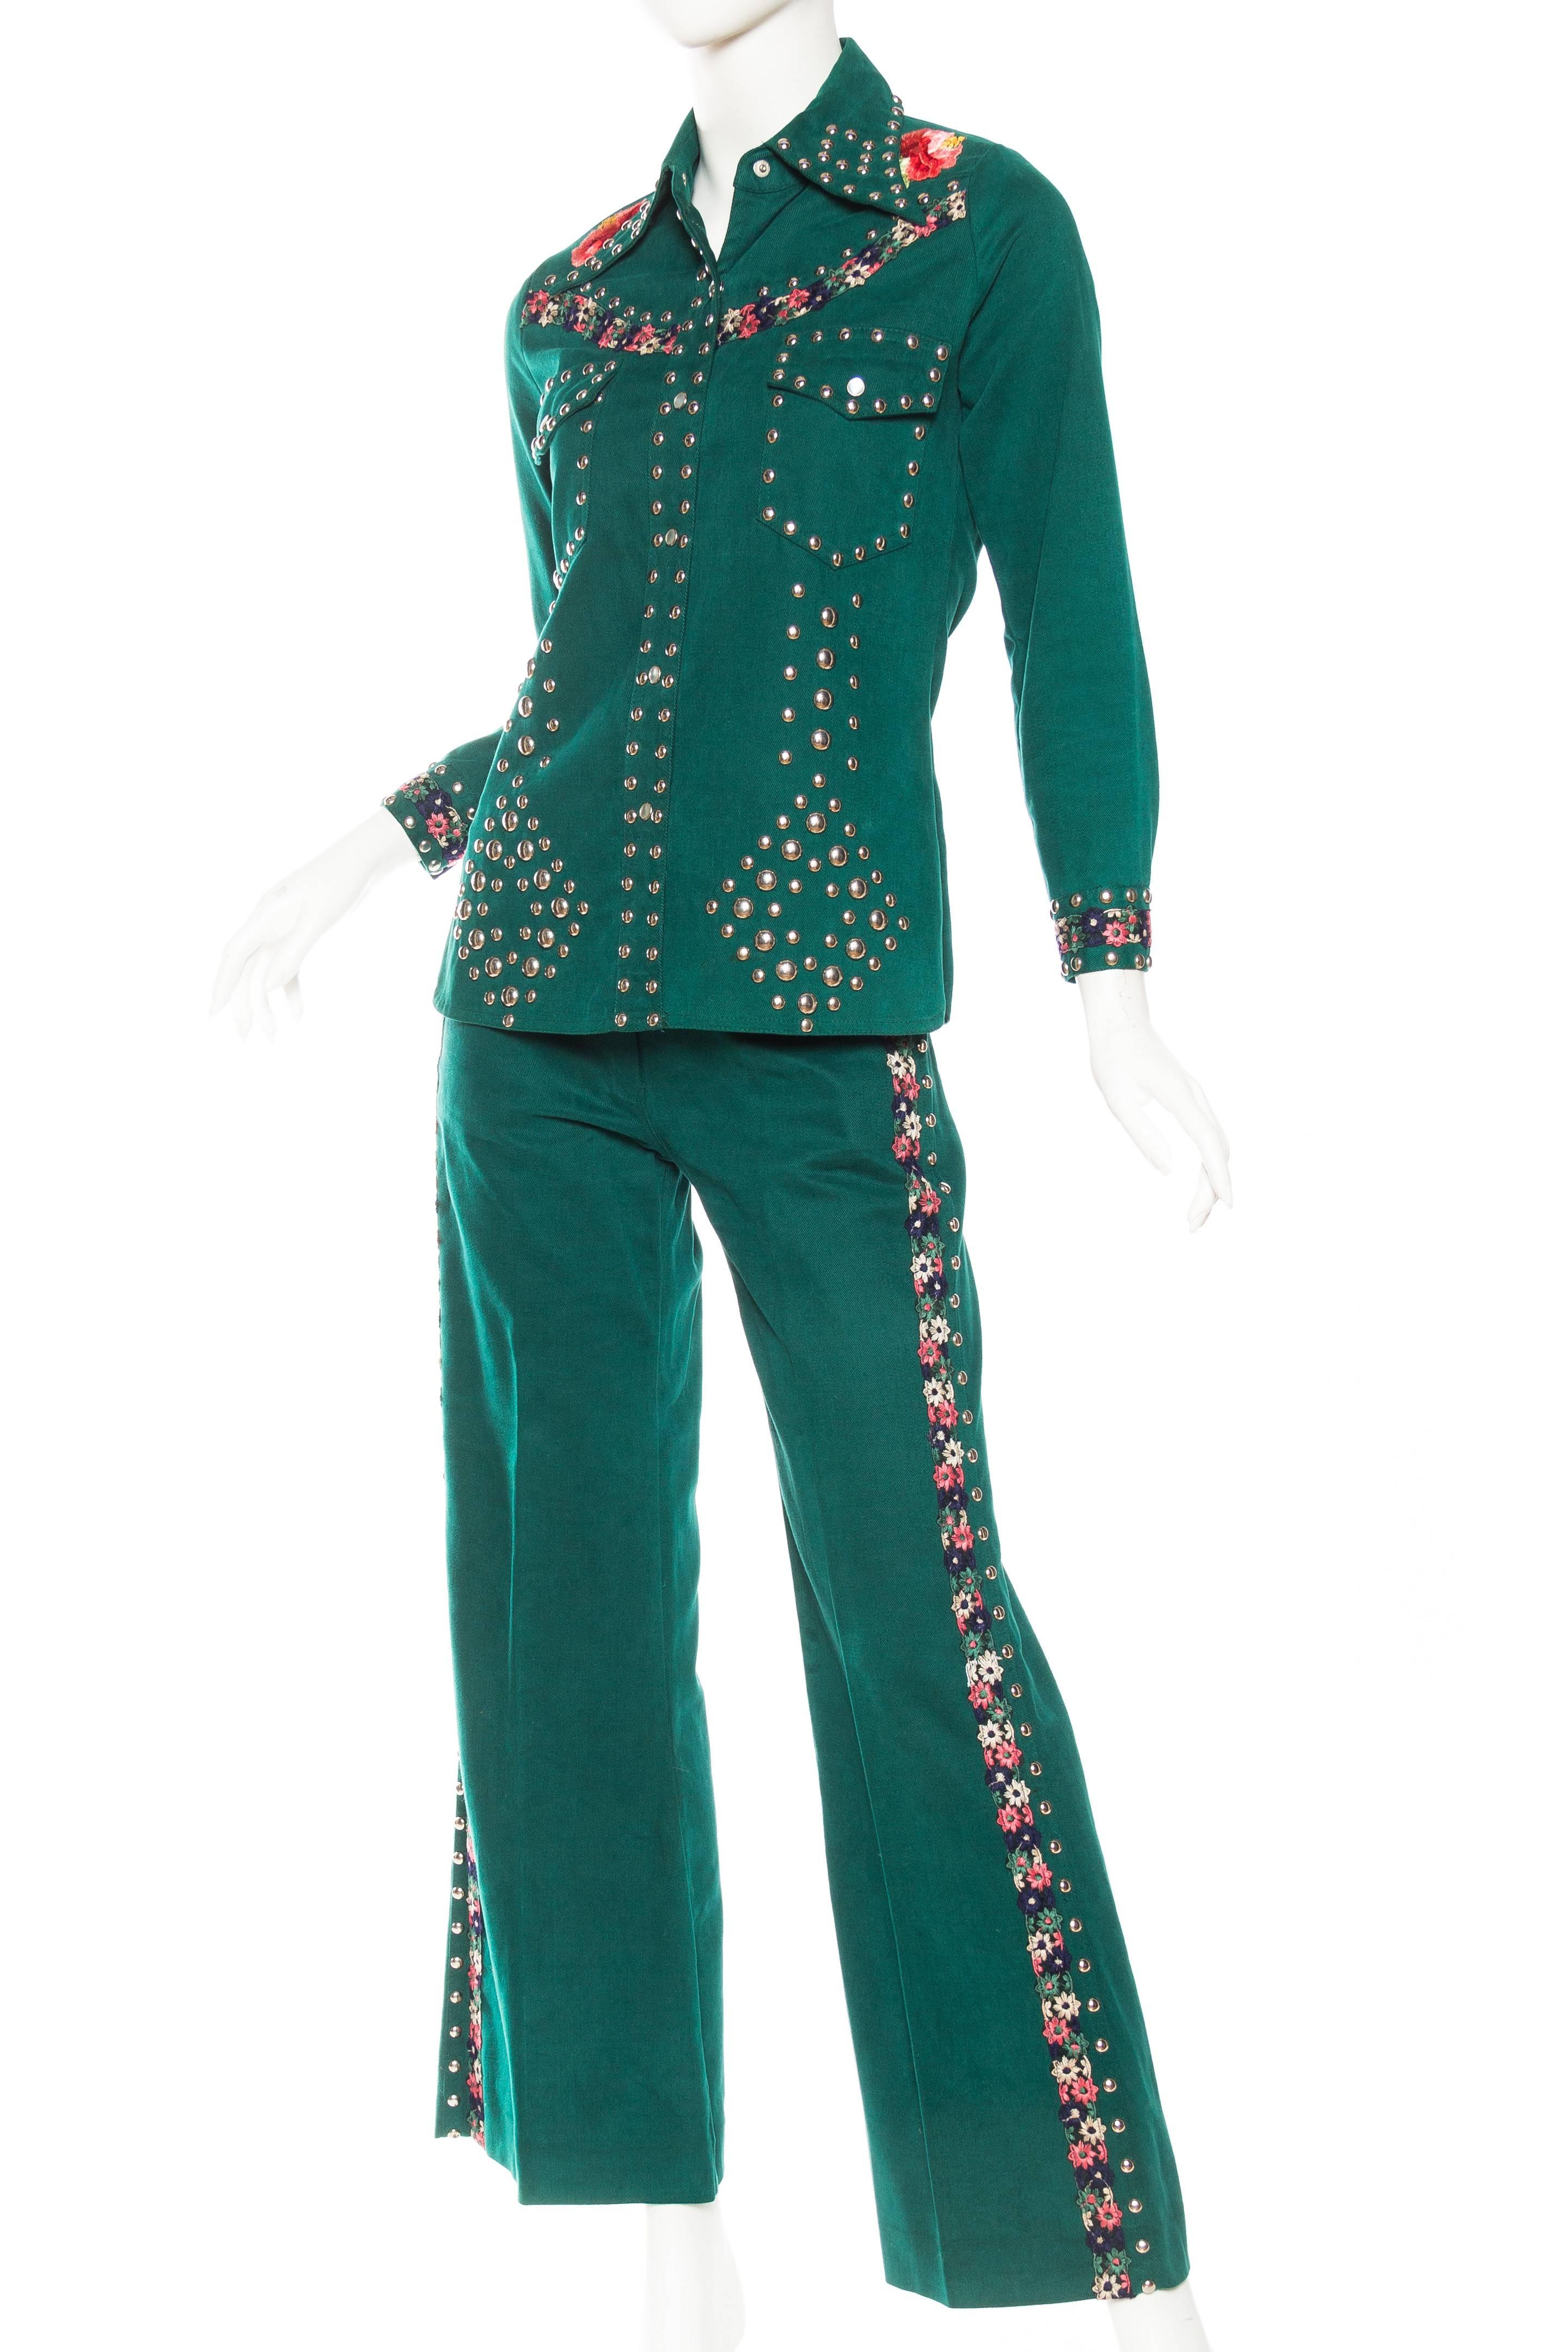 Women's Gucci Style 1970s Studded Denim Suit with Floral Embroidery